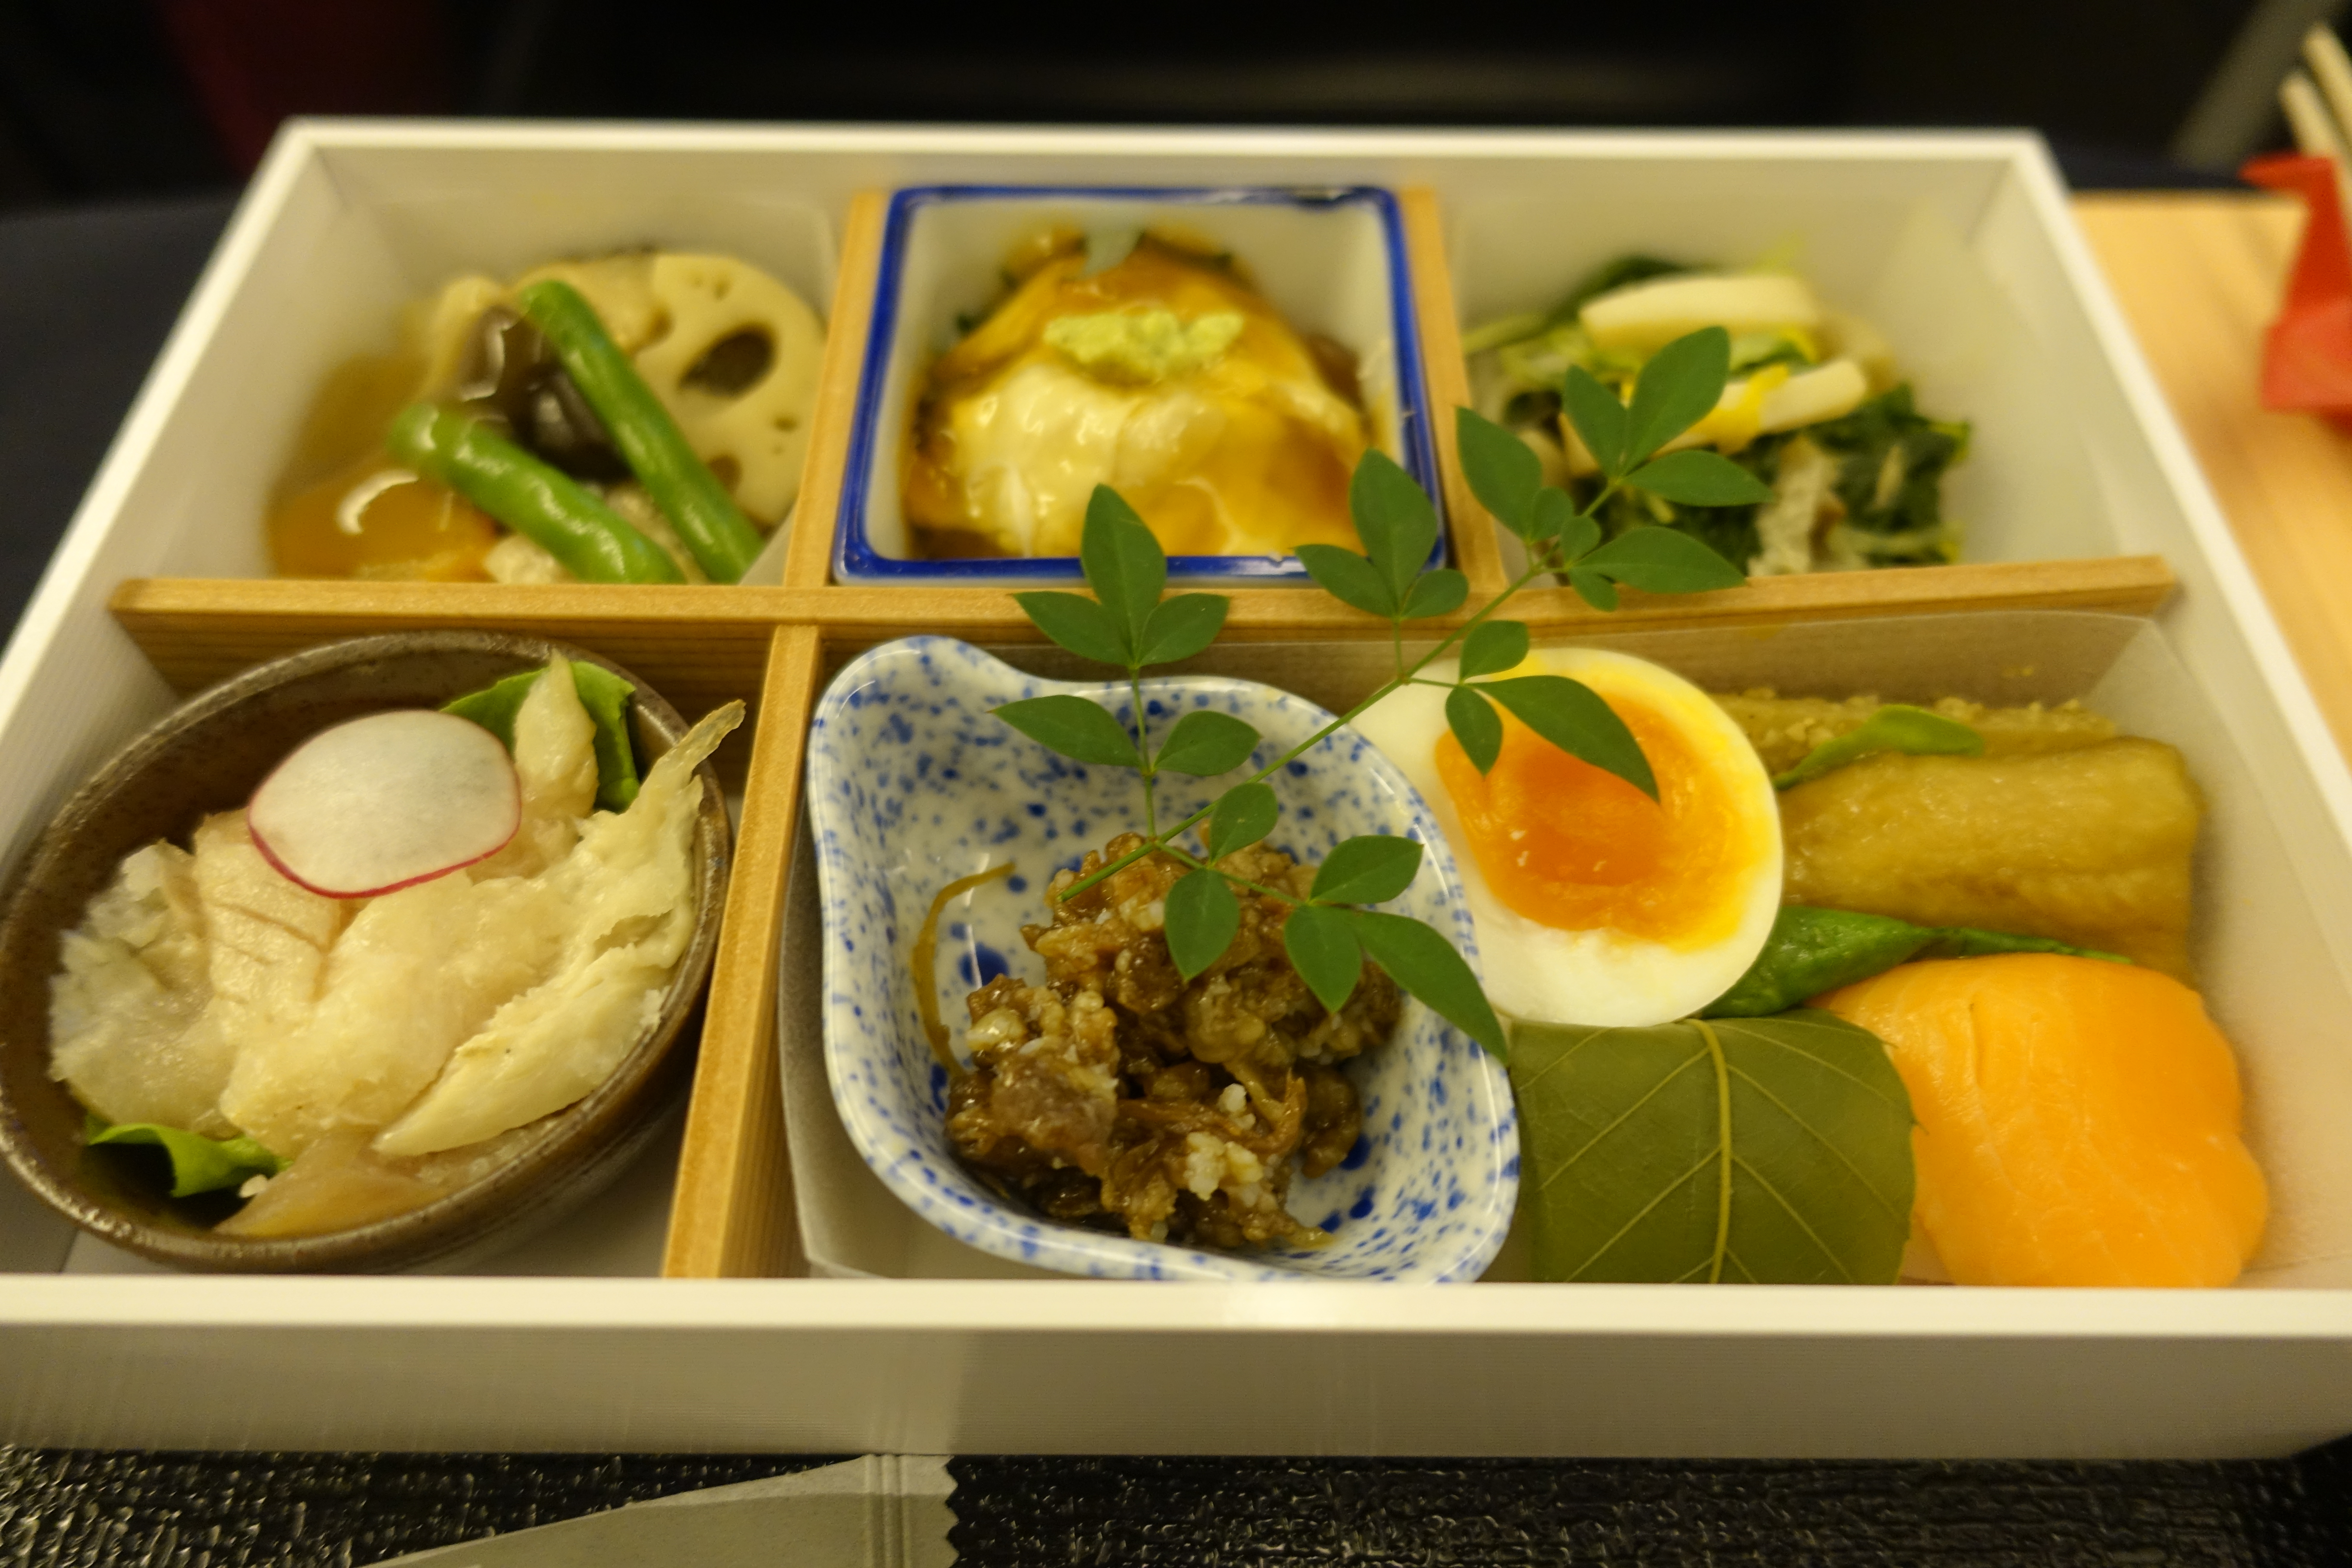 More cold dishes inside the box, and more eggs!